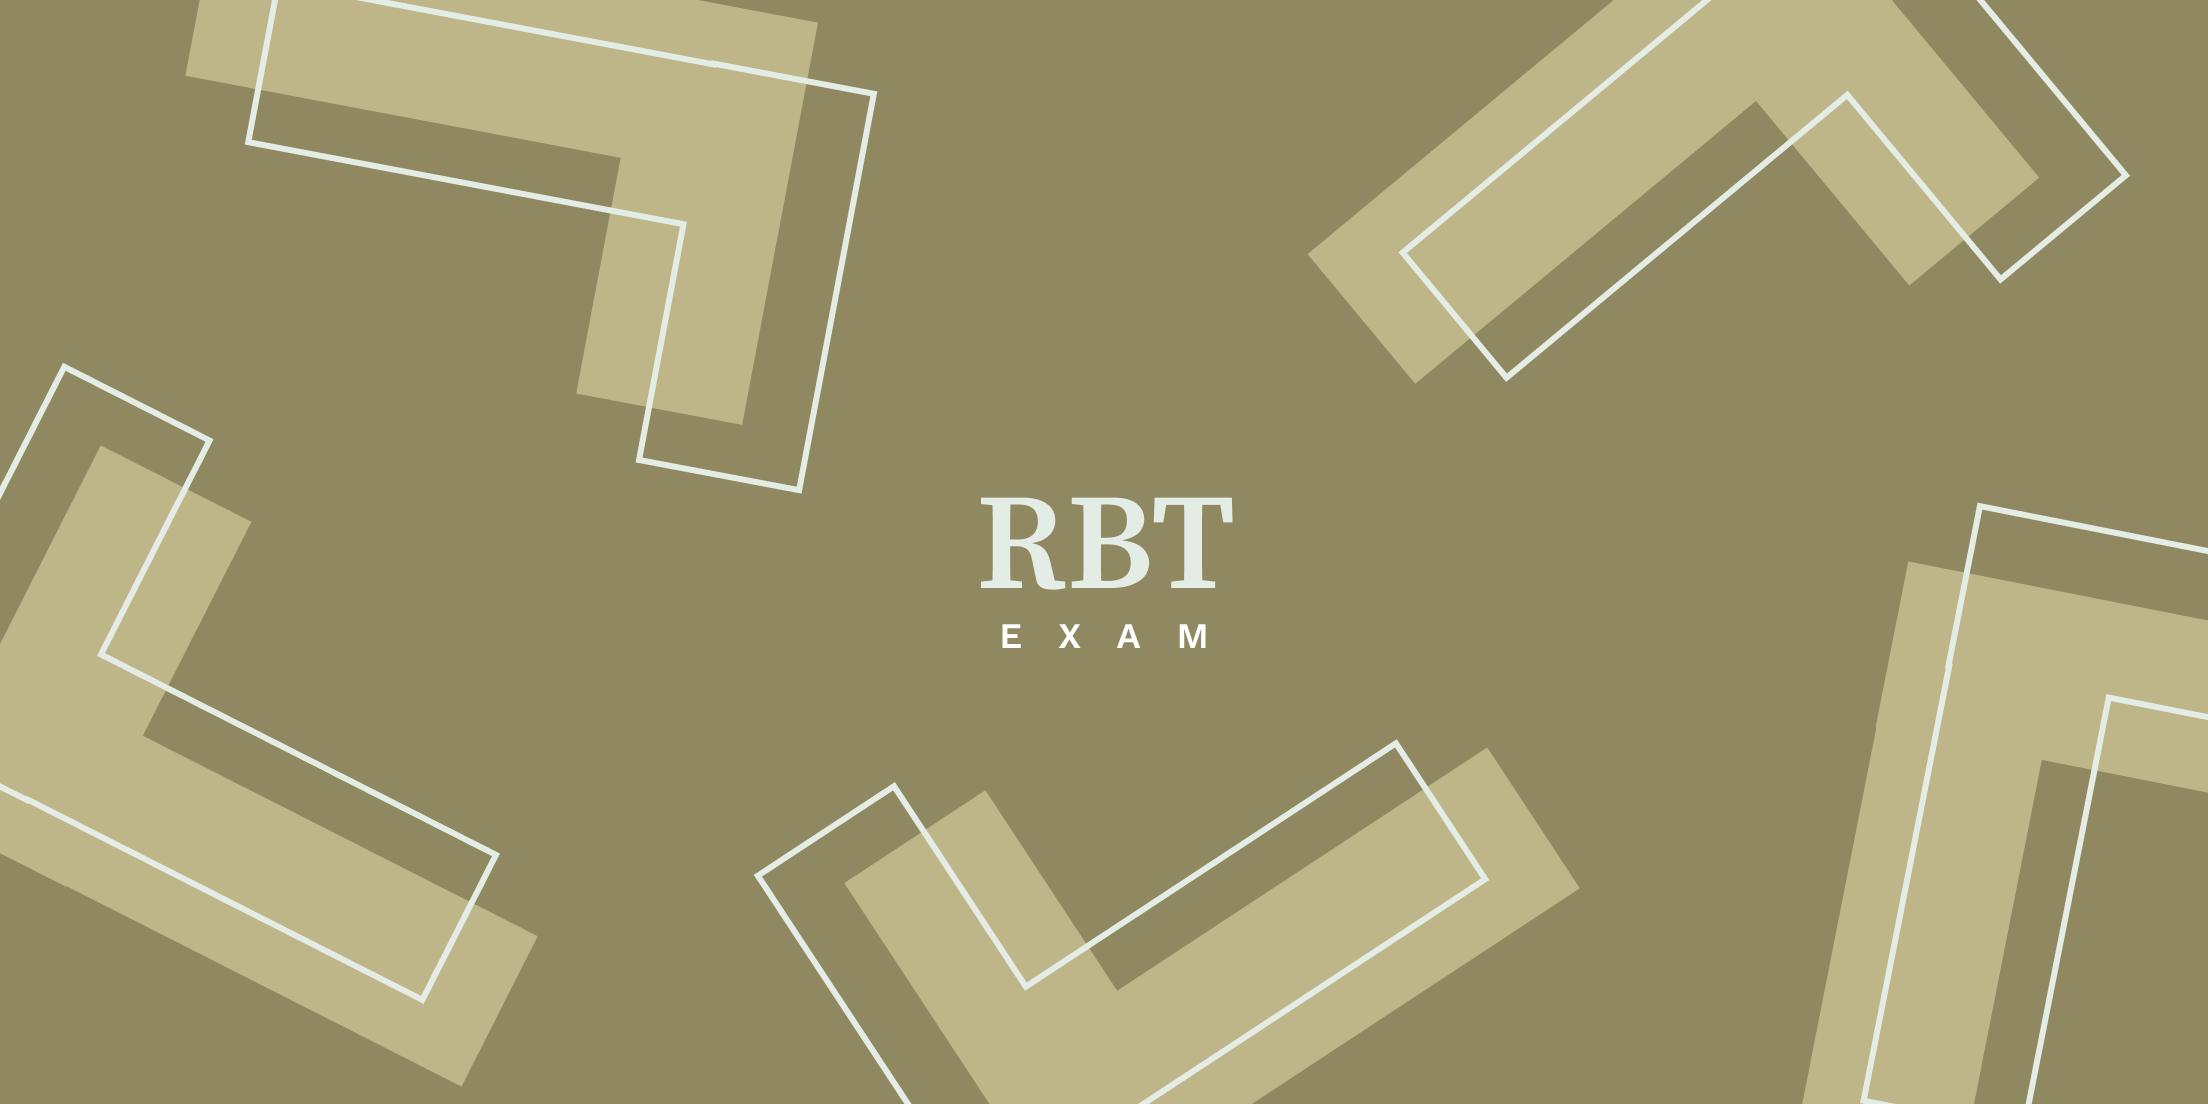 Can You Retake the RBT Exam? (How Many Times?)